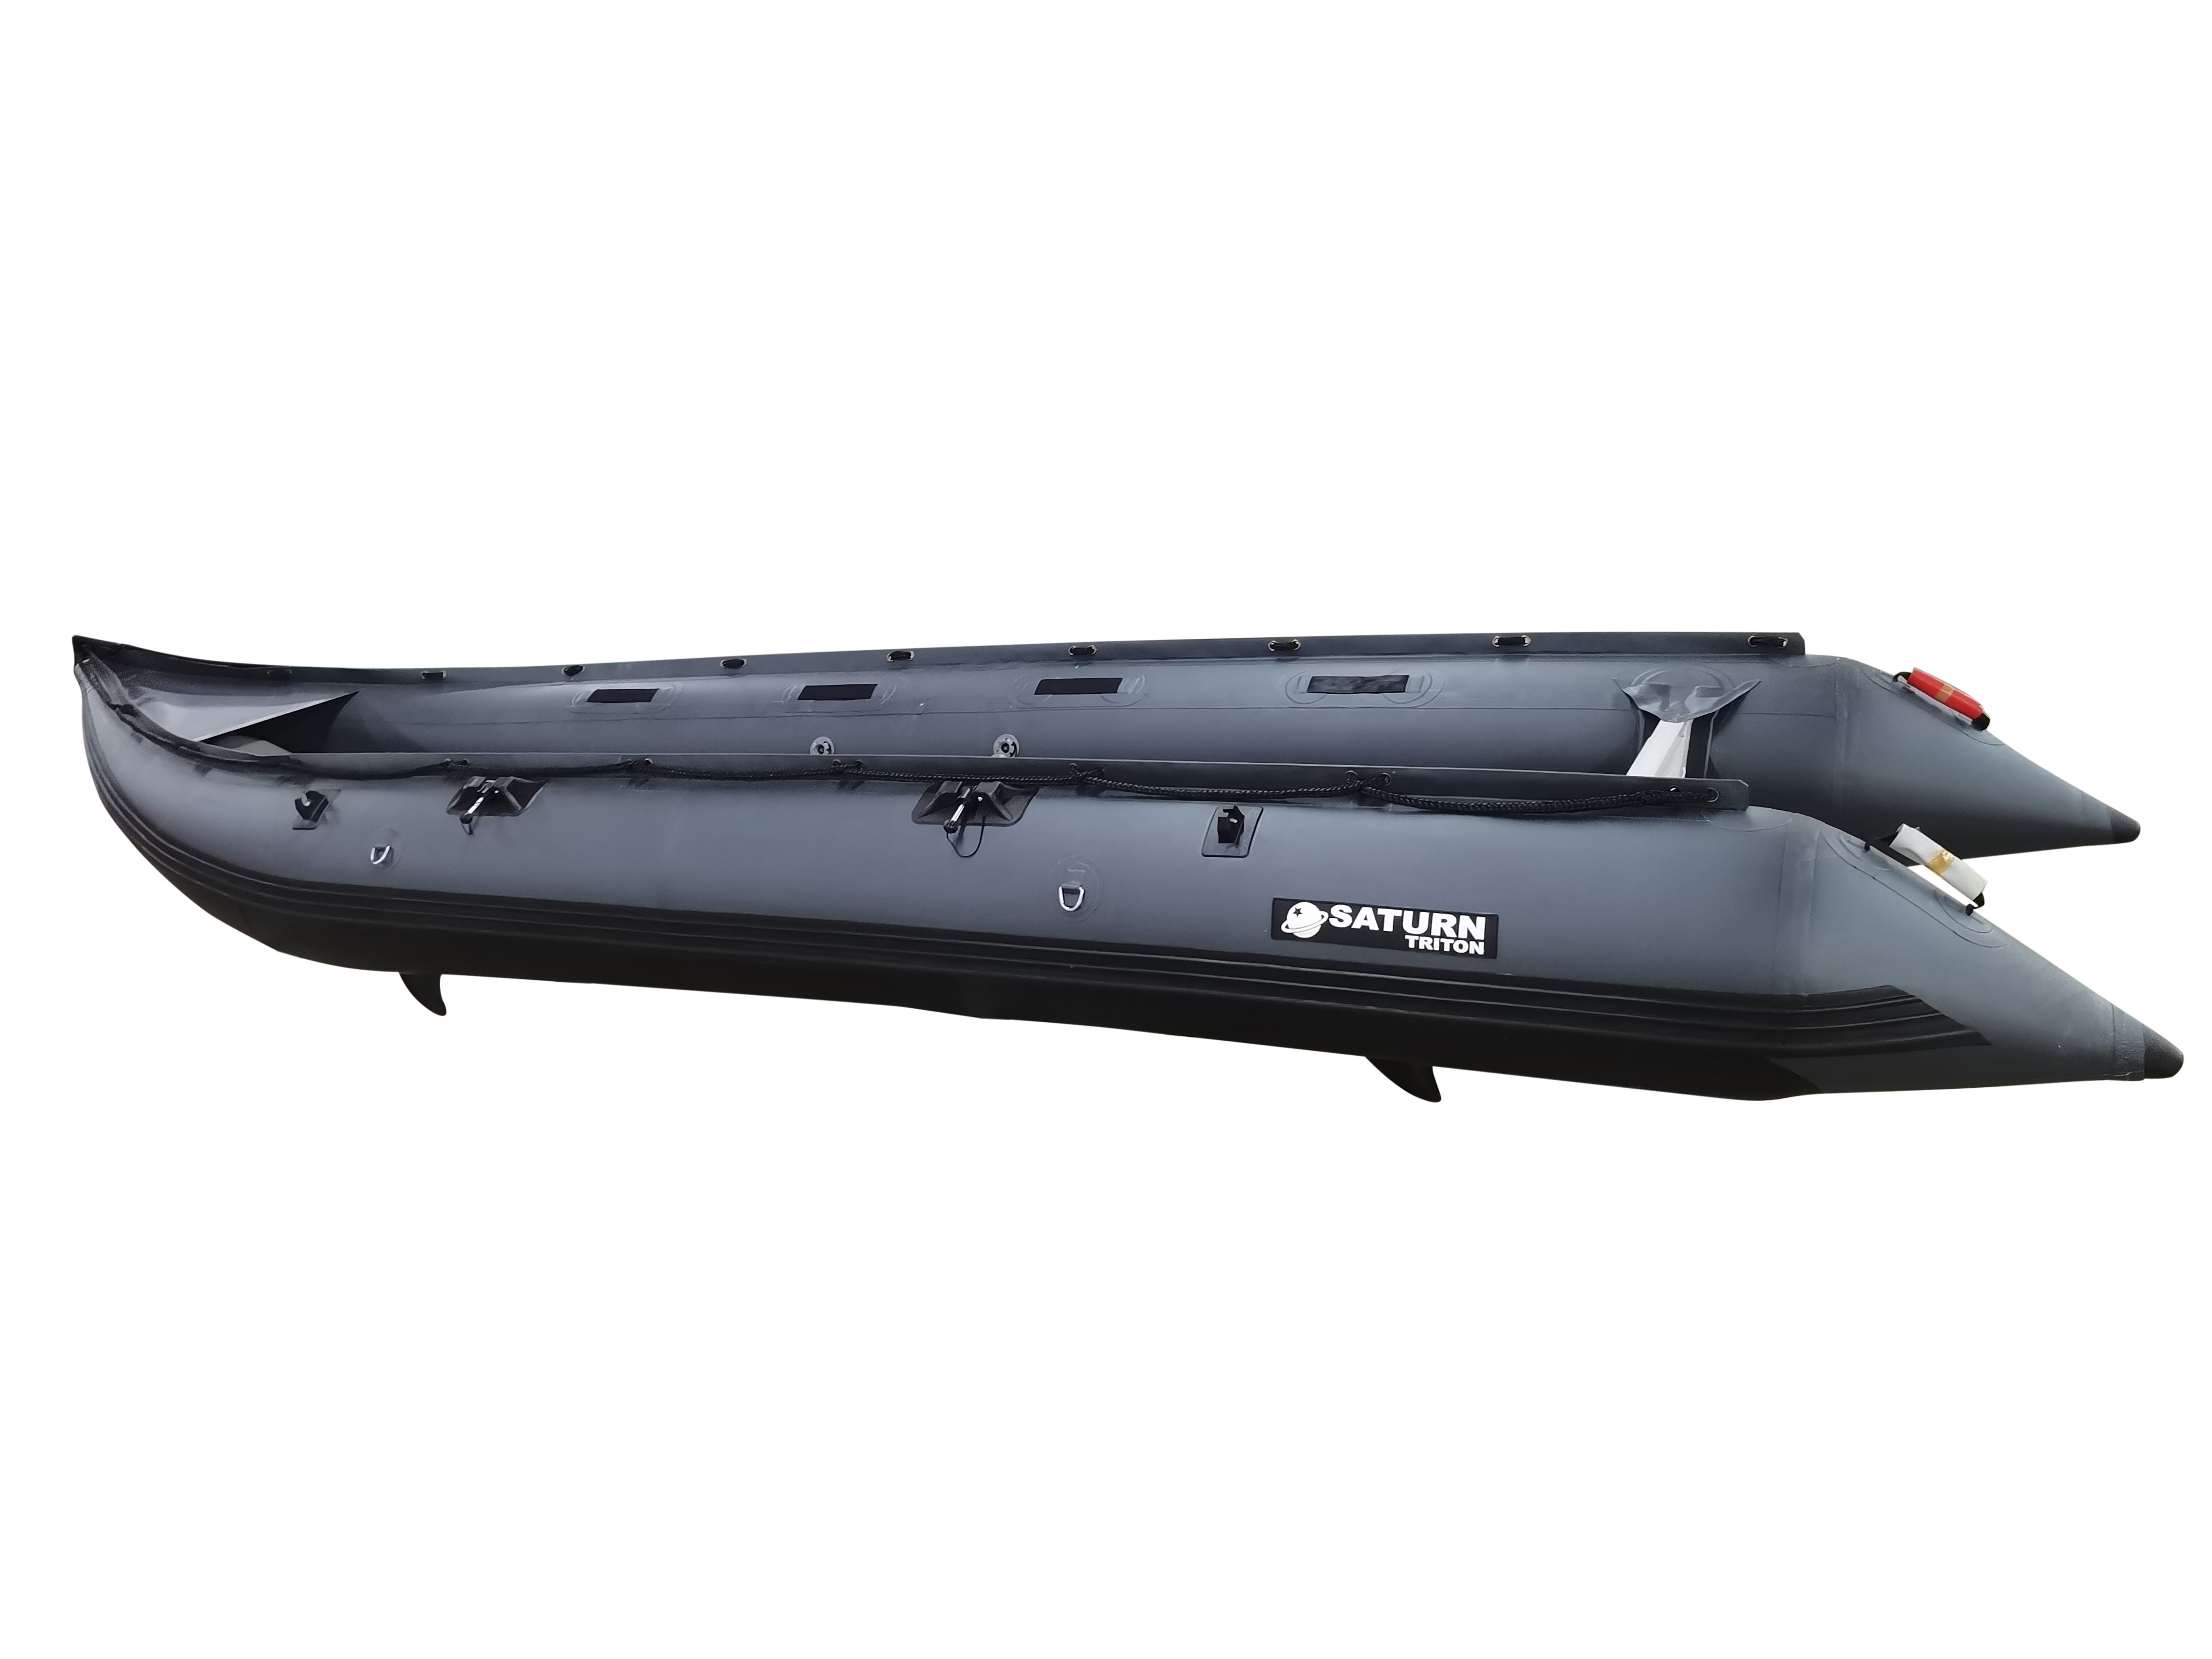 2022 13' Saturn Outfitter (Triton) Series KaBoat with Heat-Welded Seams